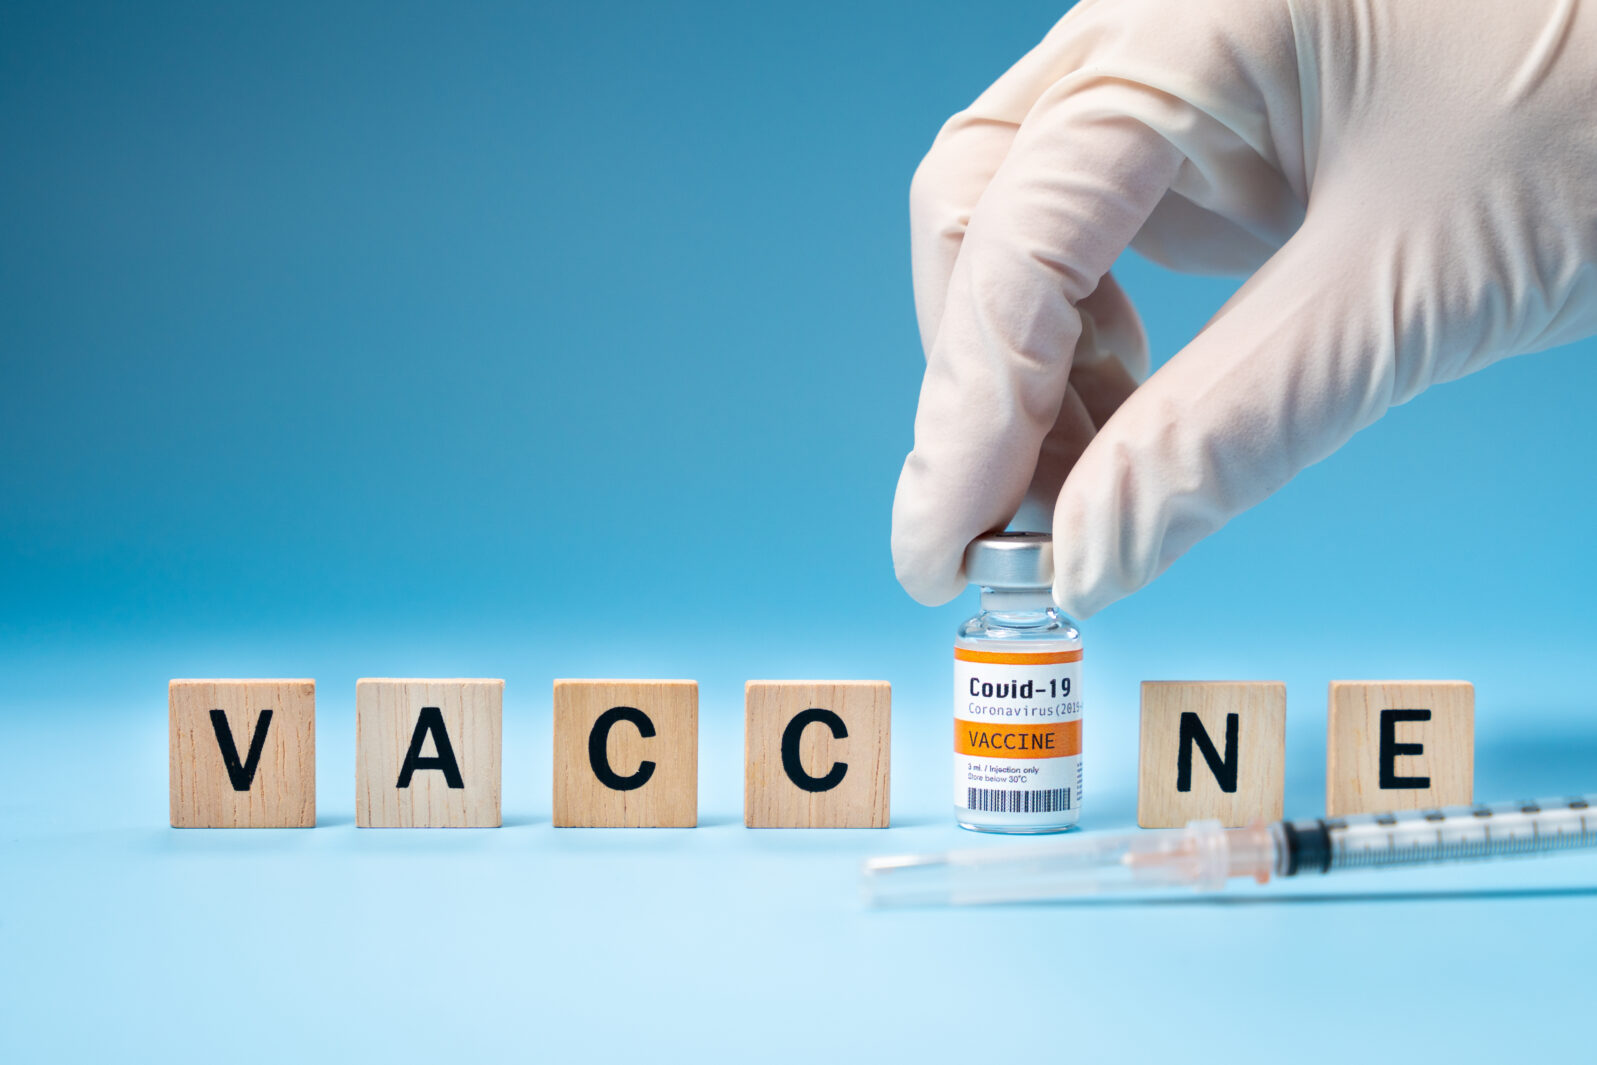 Promising Covid-19 Vaccine concept. Hand of a researcher take a 2019-nCov vaccine vial with wooden alphabet letters "VACCINE". Candidates, Authorized, Volunteers, Global trial, Hope, Successful.